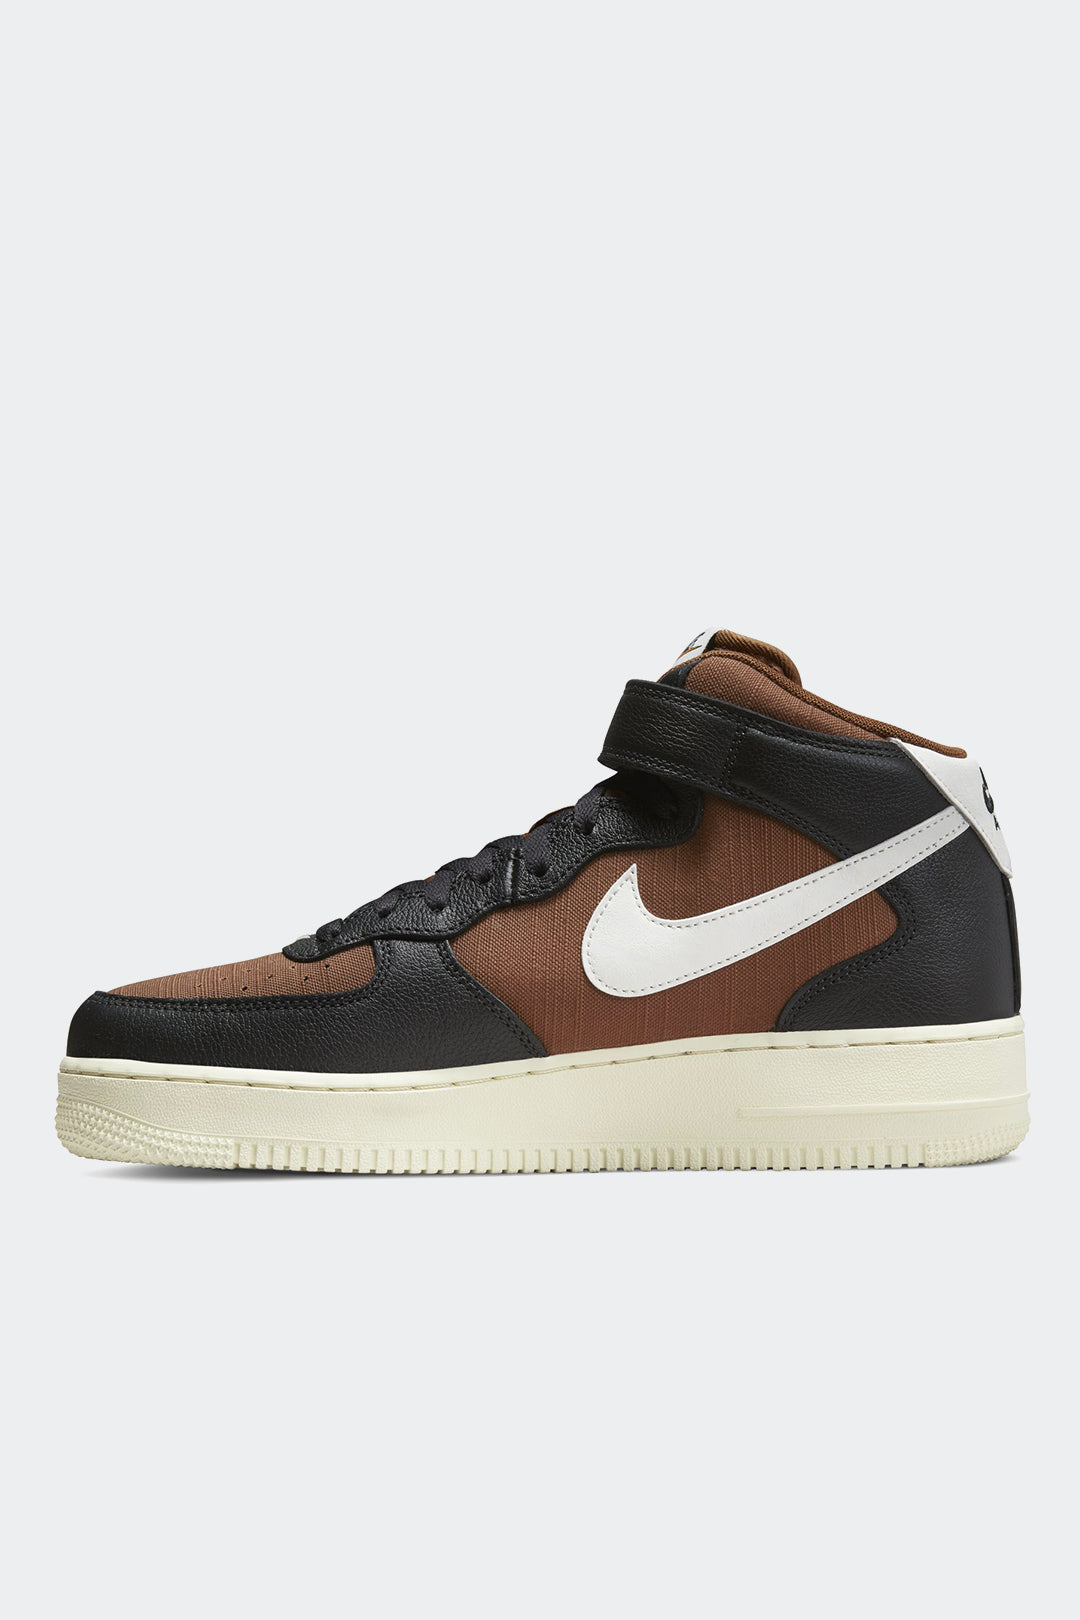 NIKE AIR FORCE 1 MID '07 LX VNTG - HYPE